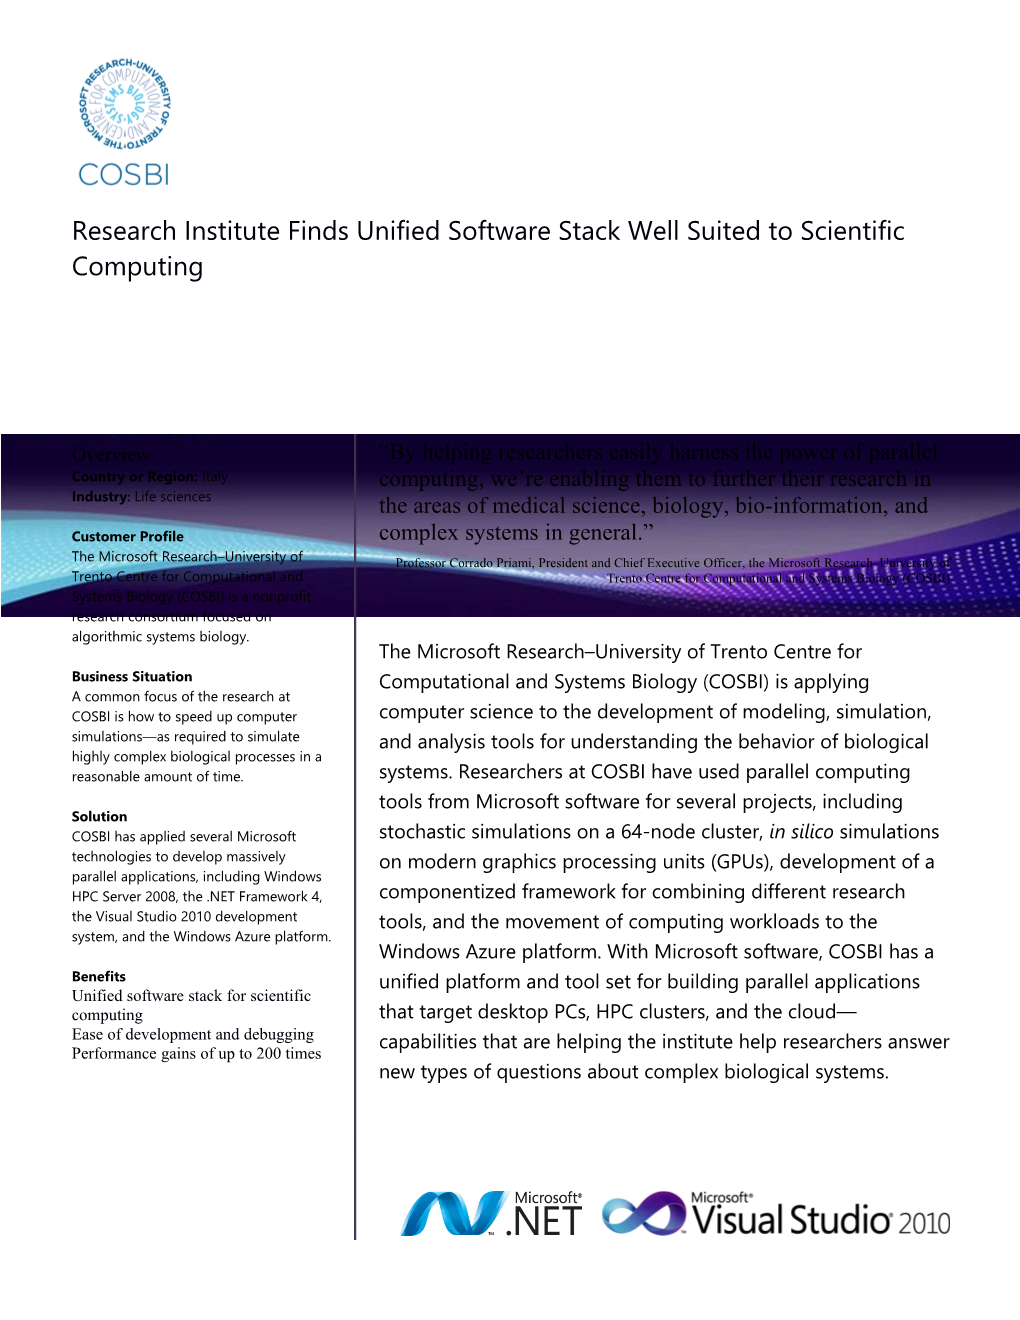 VS 2010 Research Institute Finds Unified Software Stack Well-Suited to Scientific Computing